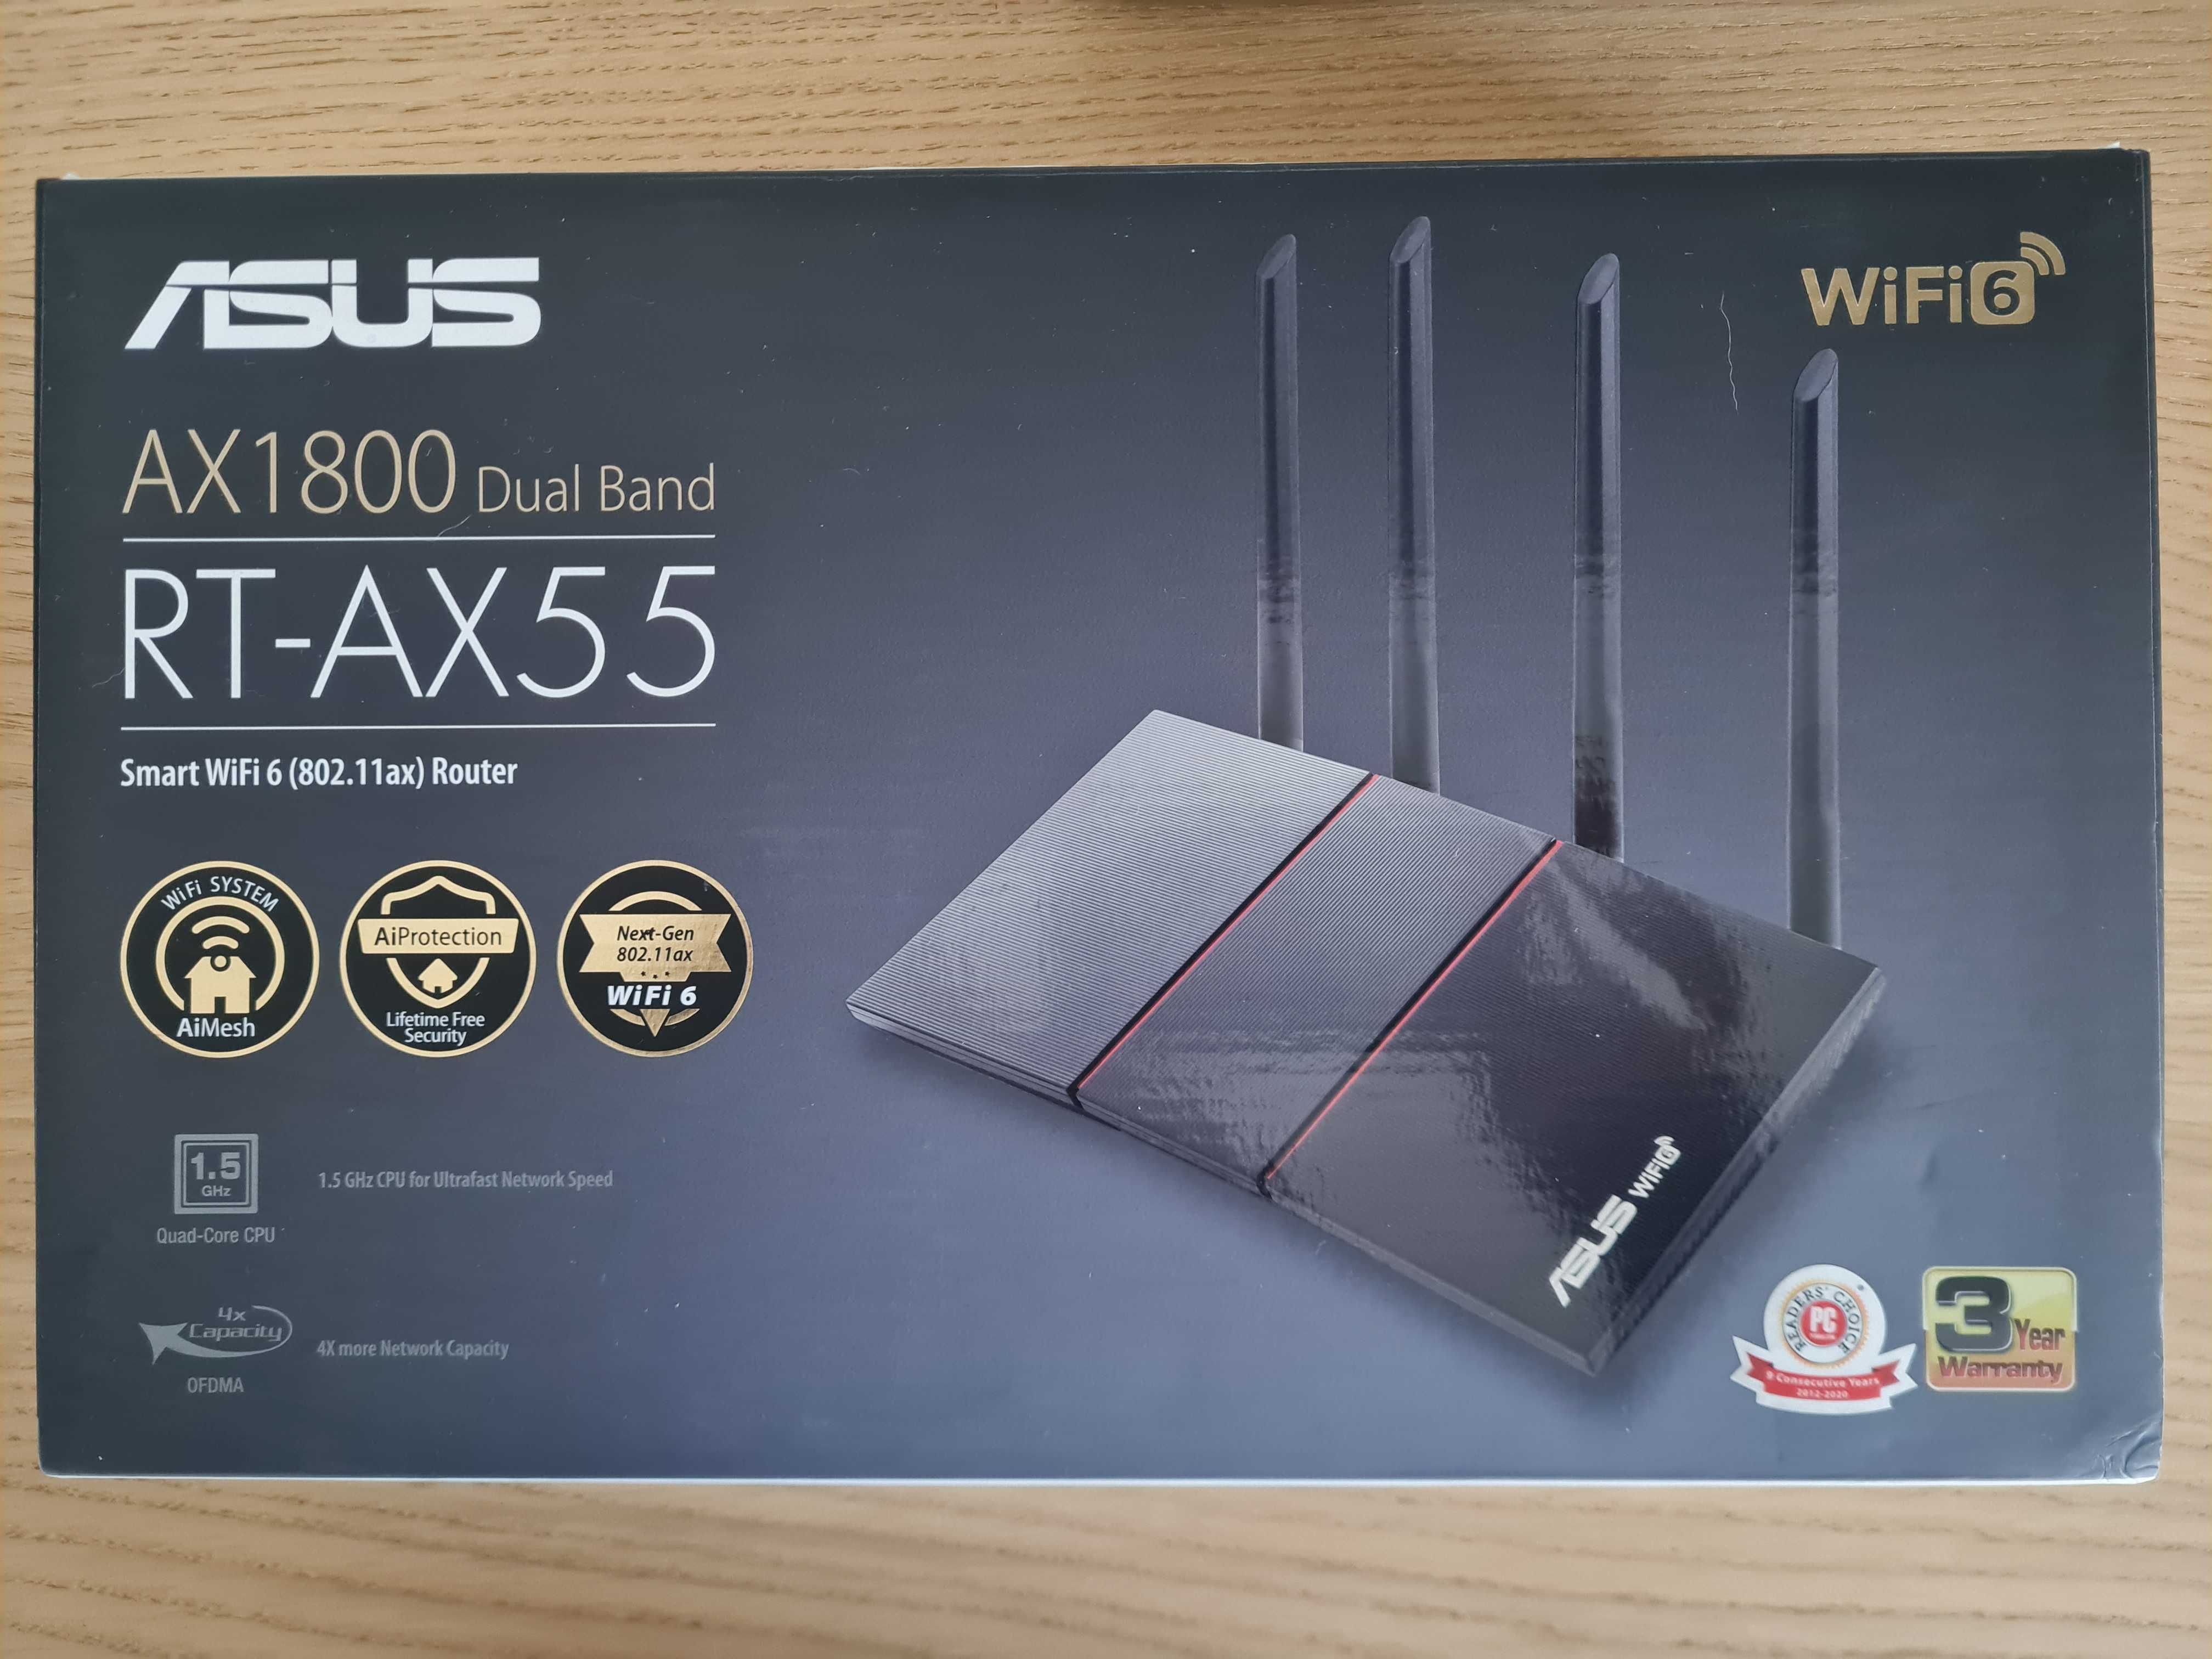 Asus RT-AX55 router AX1800 WiFi 6 (802.11ax)